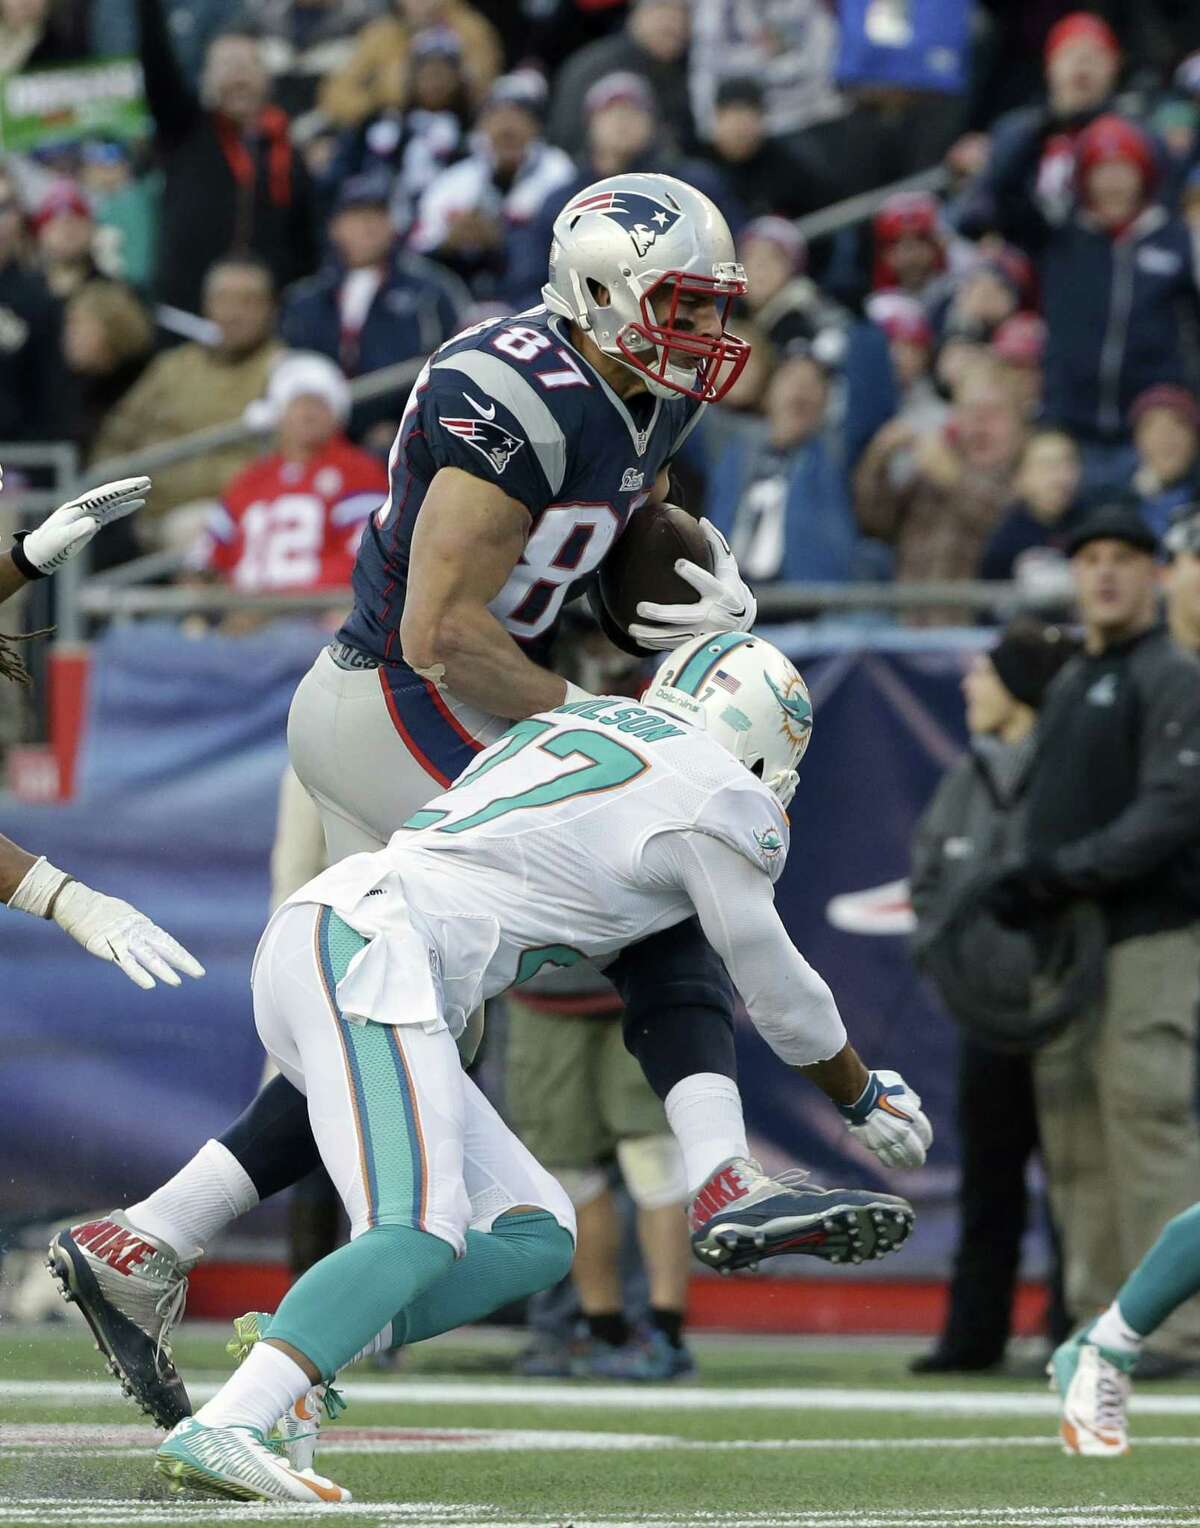 New England Patriots tight end Rob Gronkowski, top, advances the ball while under pressure from Miami Dolphins strong safety Jimmy Wilson, below, in the second half of an NFL football game Sunday, Dec. 14, 2014, in Foxborough, Mass. (AP Photo/Steven Senne)